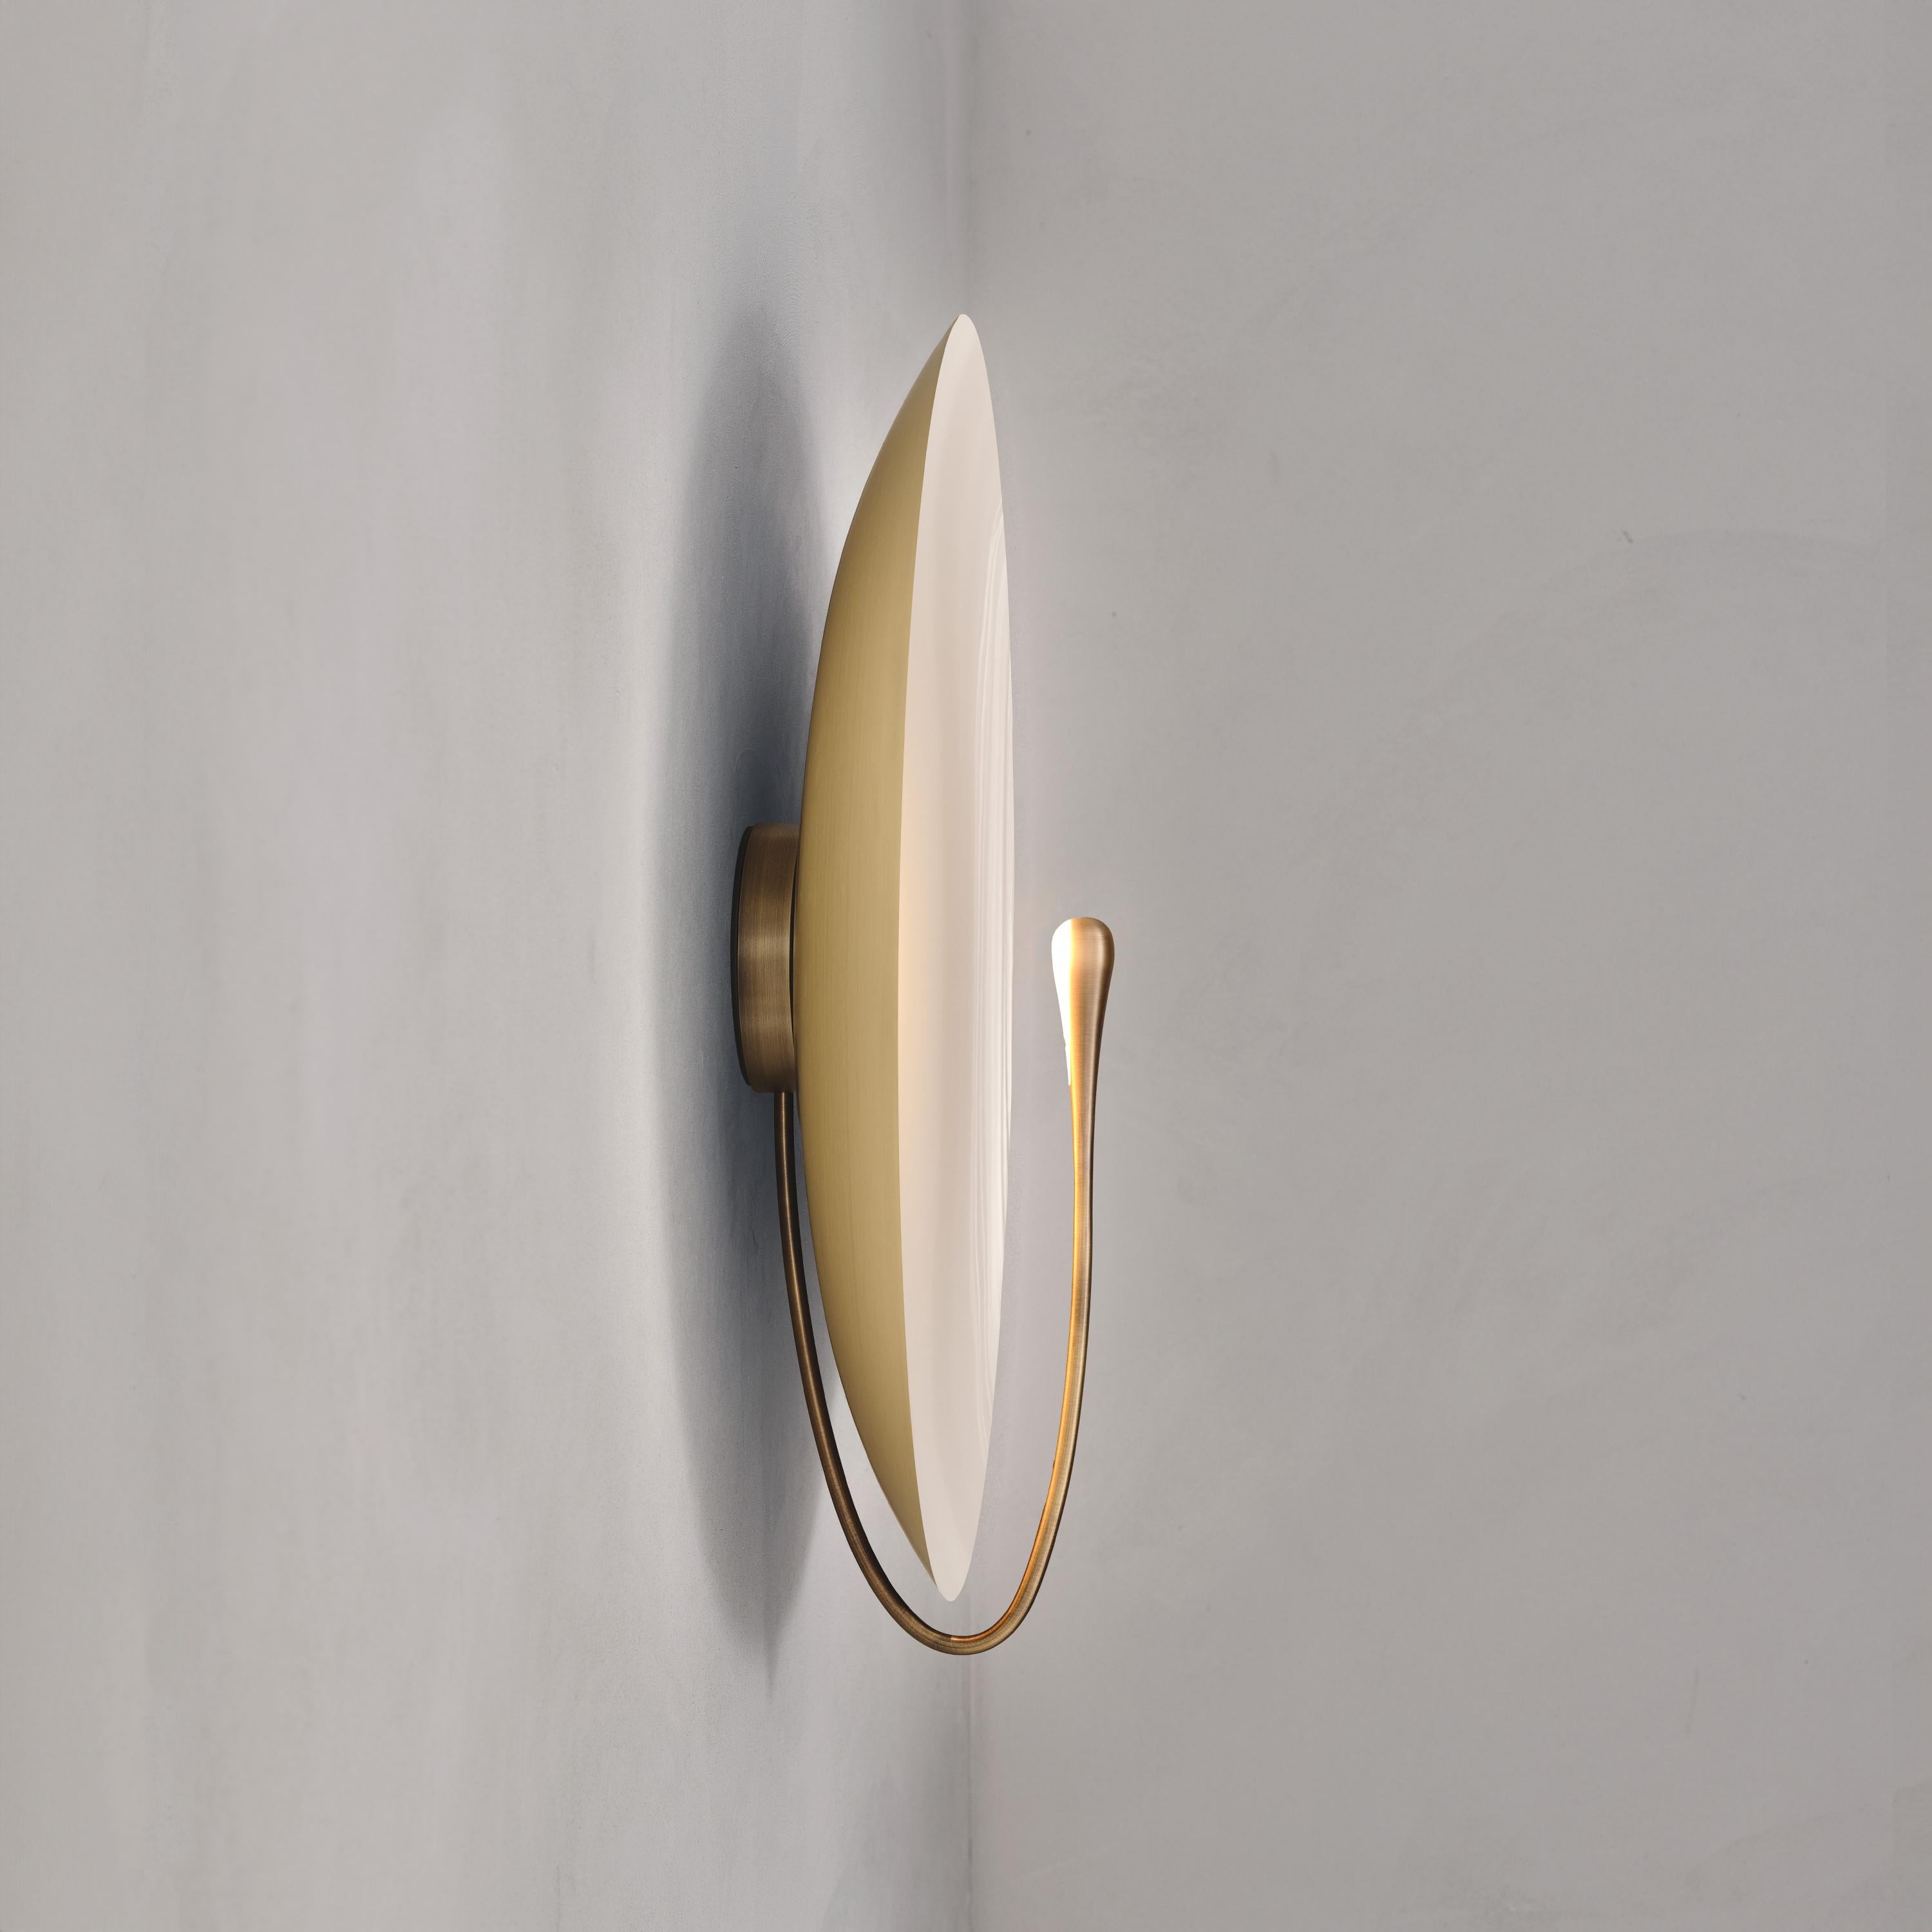 Brushed 'Cosmic Purion XL' Handmade Patinated Brass Contemporary Wall Light Sconce For Sale